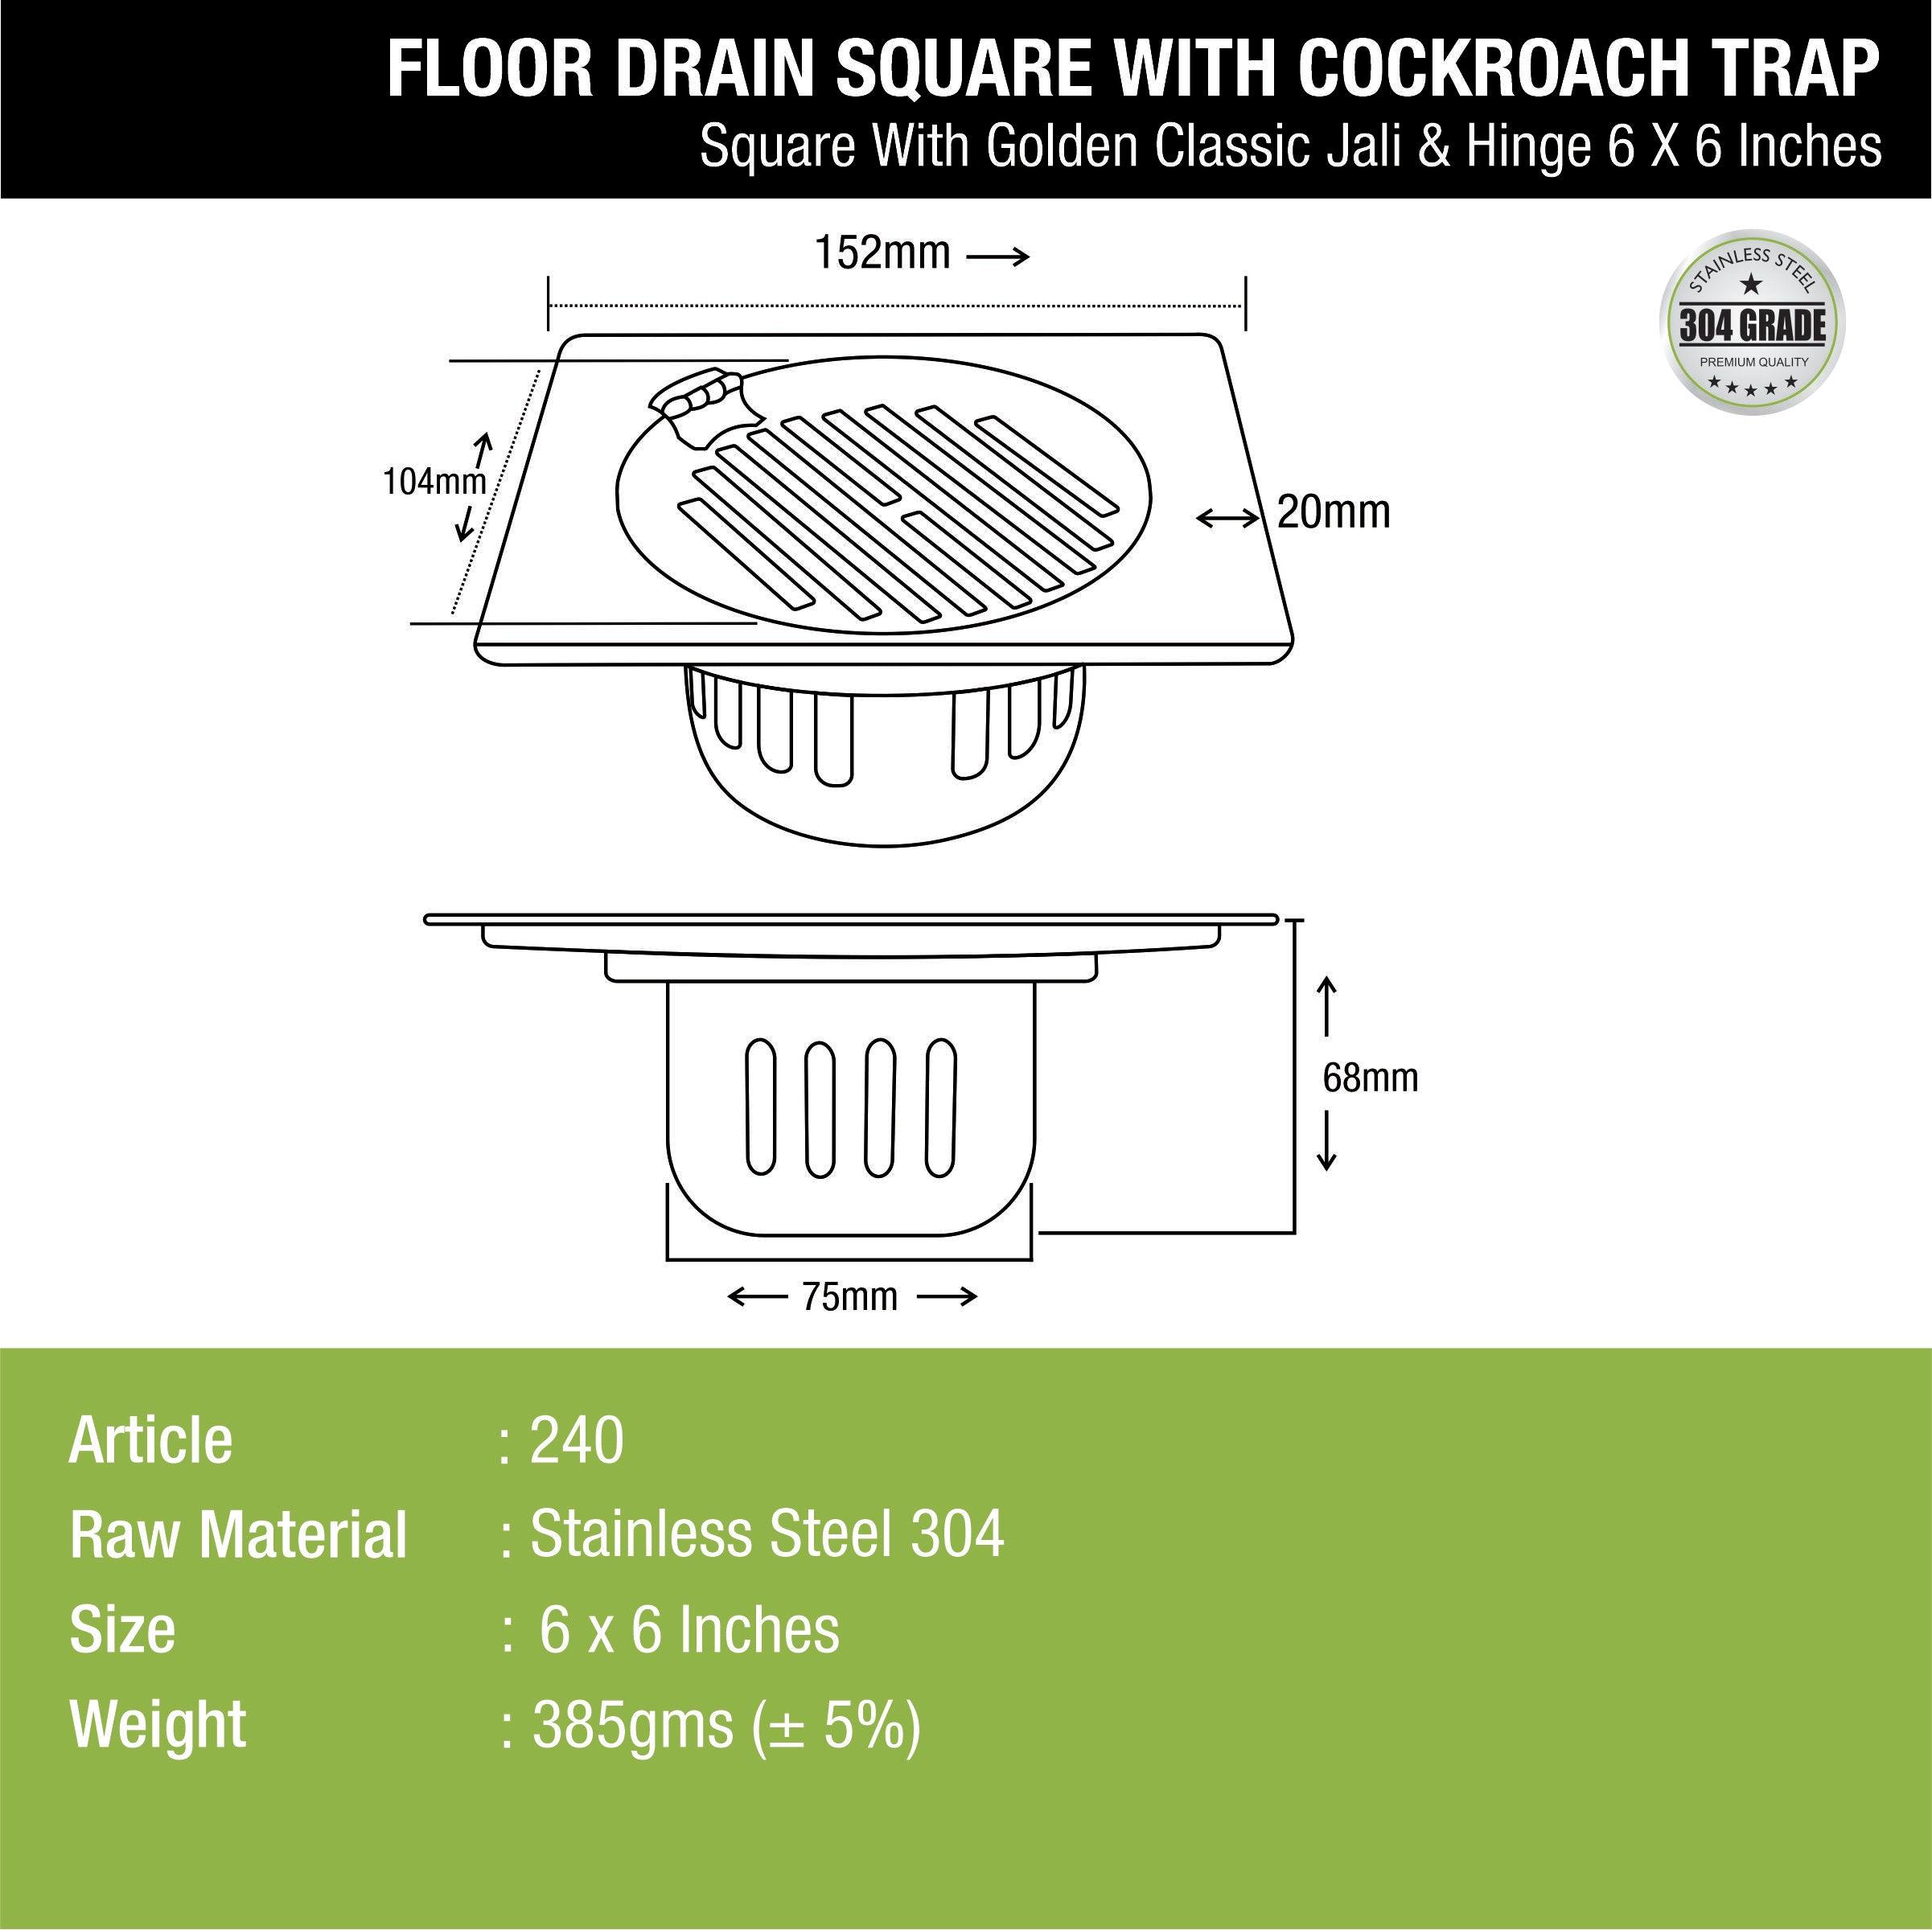 Golden Classic Jali Square Floor Drain (6 x 6 Inches) with Hinge and Cockroach Trap - LIPKA - Lipka Home